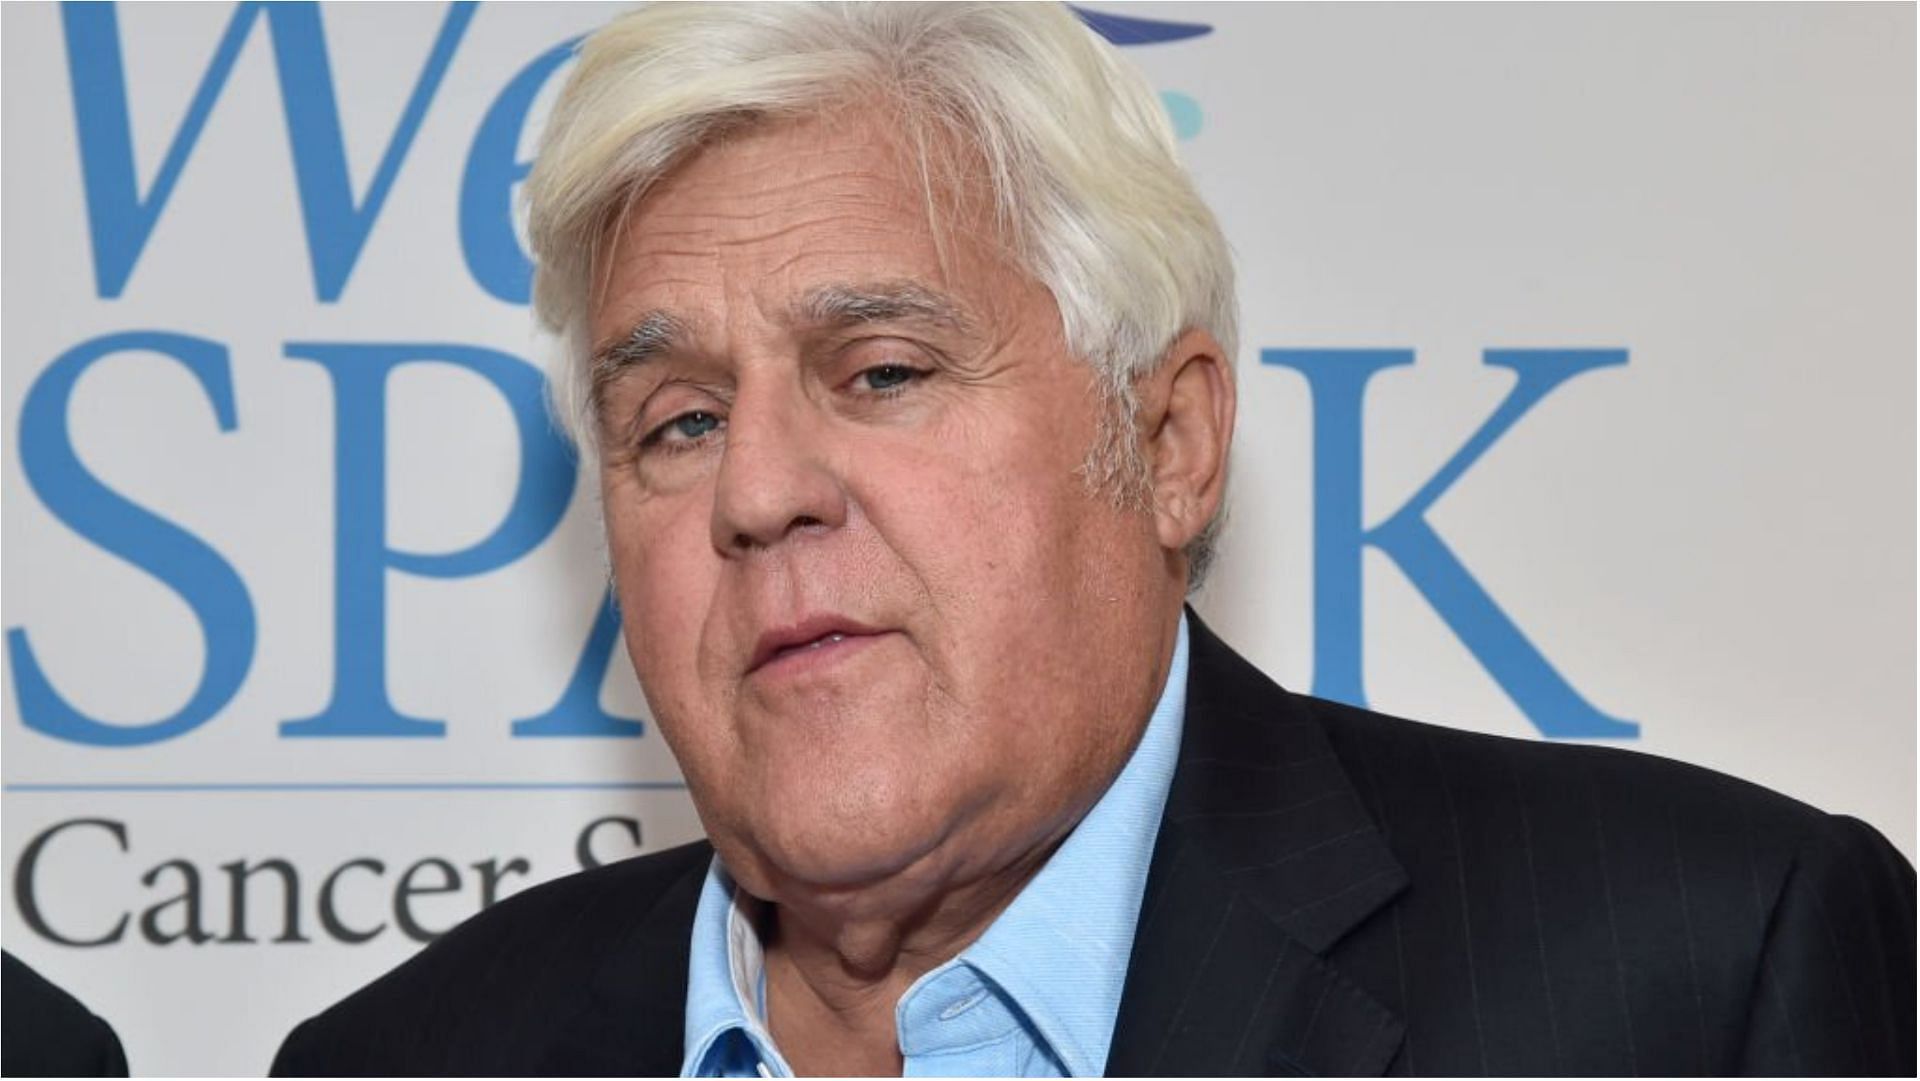 Jay Leno gave an update about his condition following a fire accident (Image via Alberto E. Rodriguez/Getty Images)